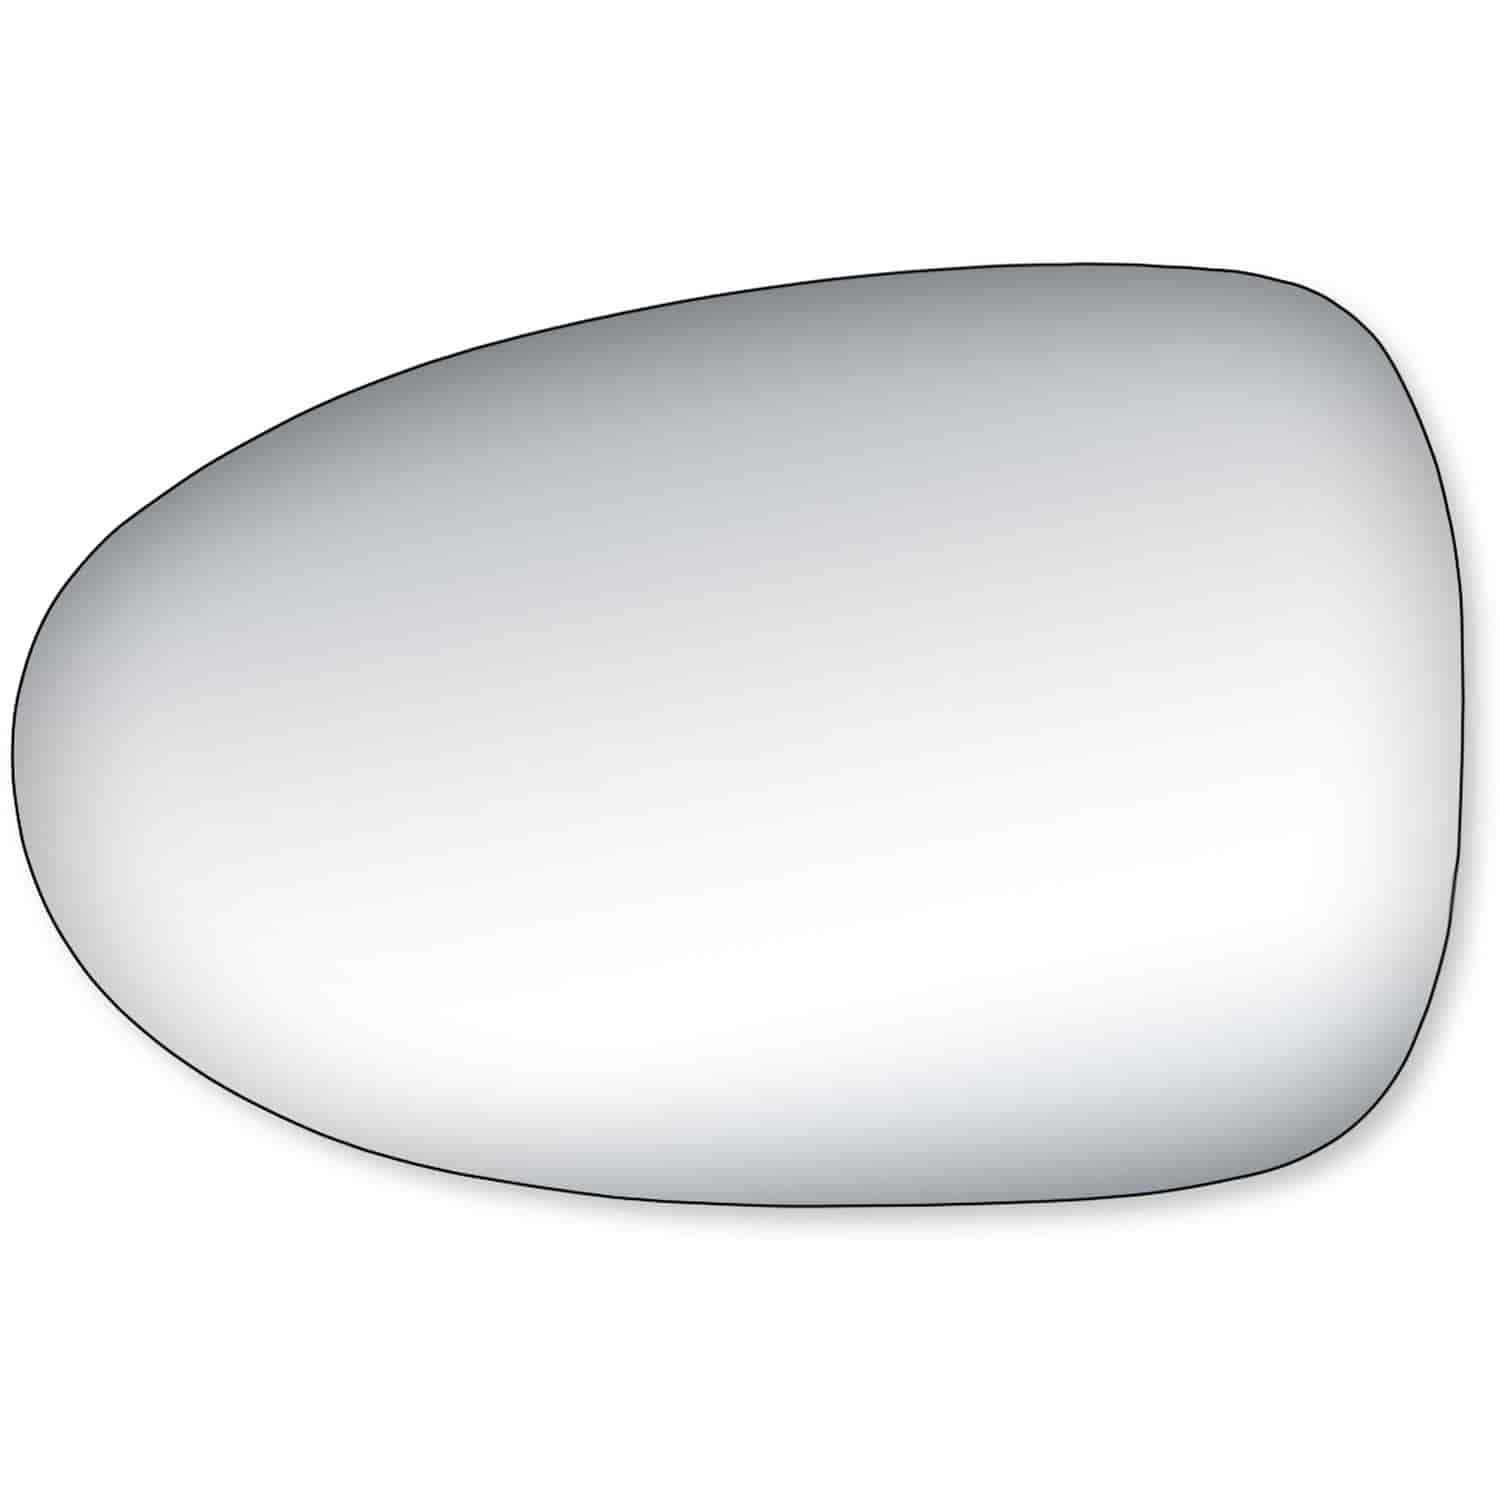 Replacement Glass for 98-01 Altima the glass measures 4 3/8 tall by 6 7/8 wide and 6 7/8 diagonally